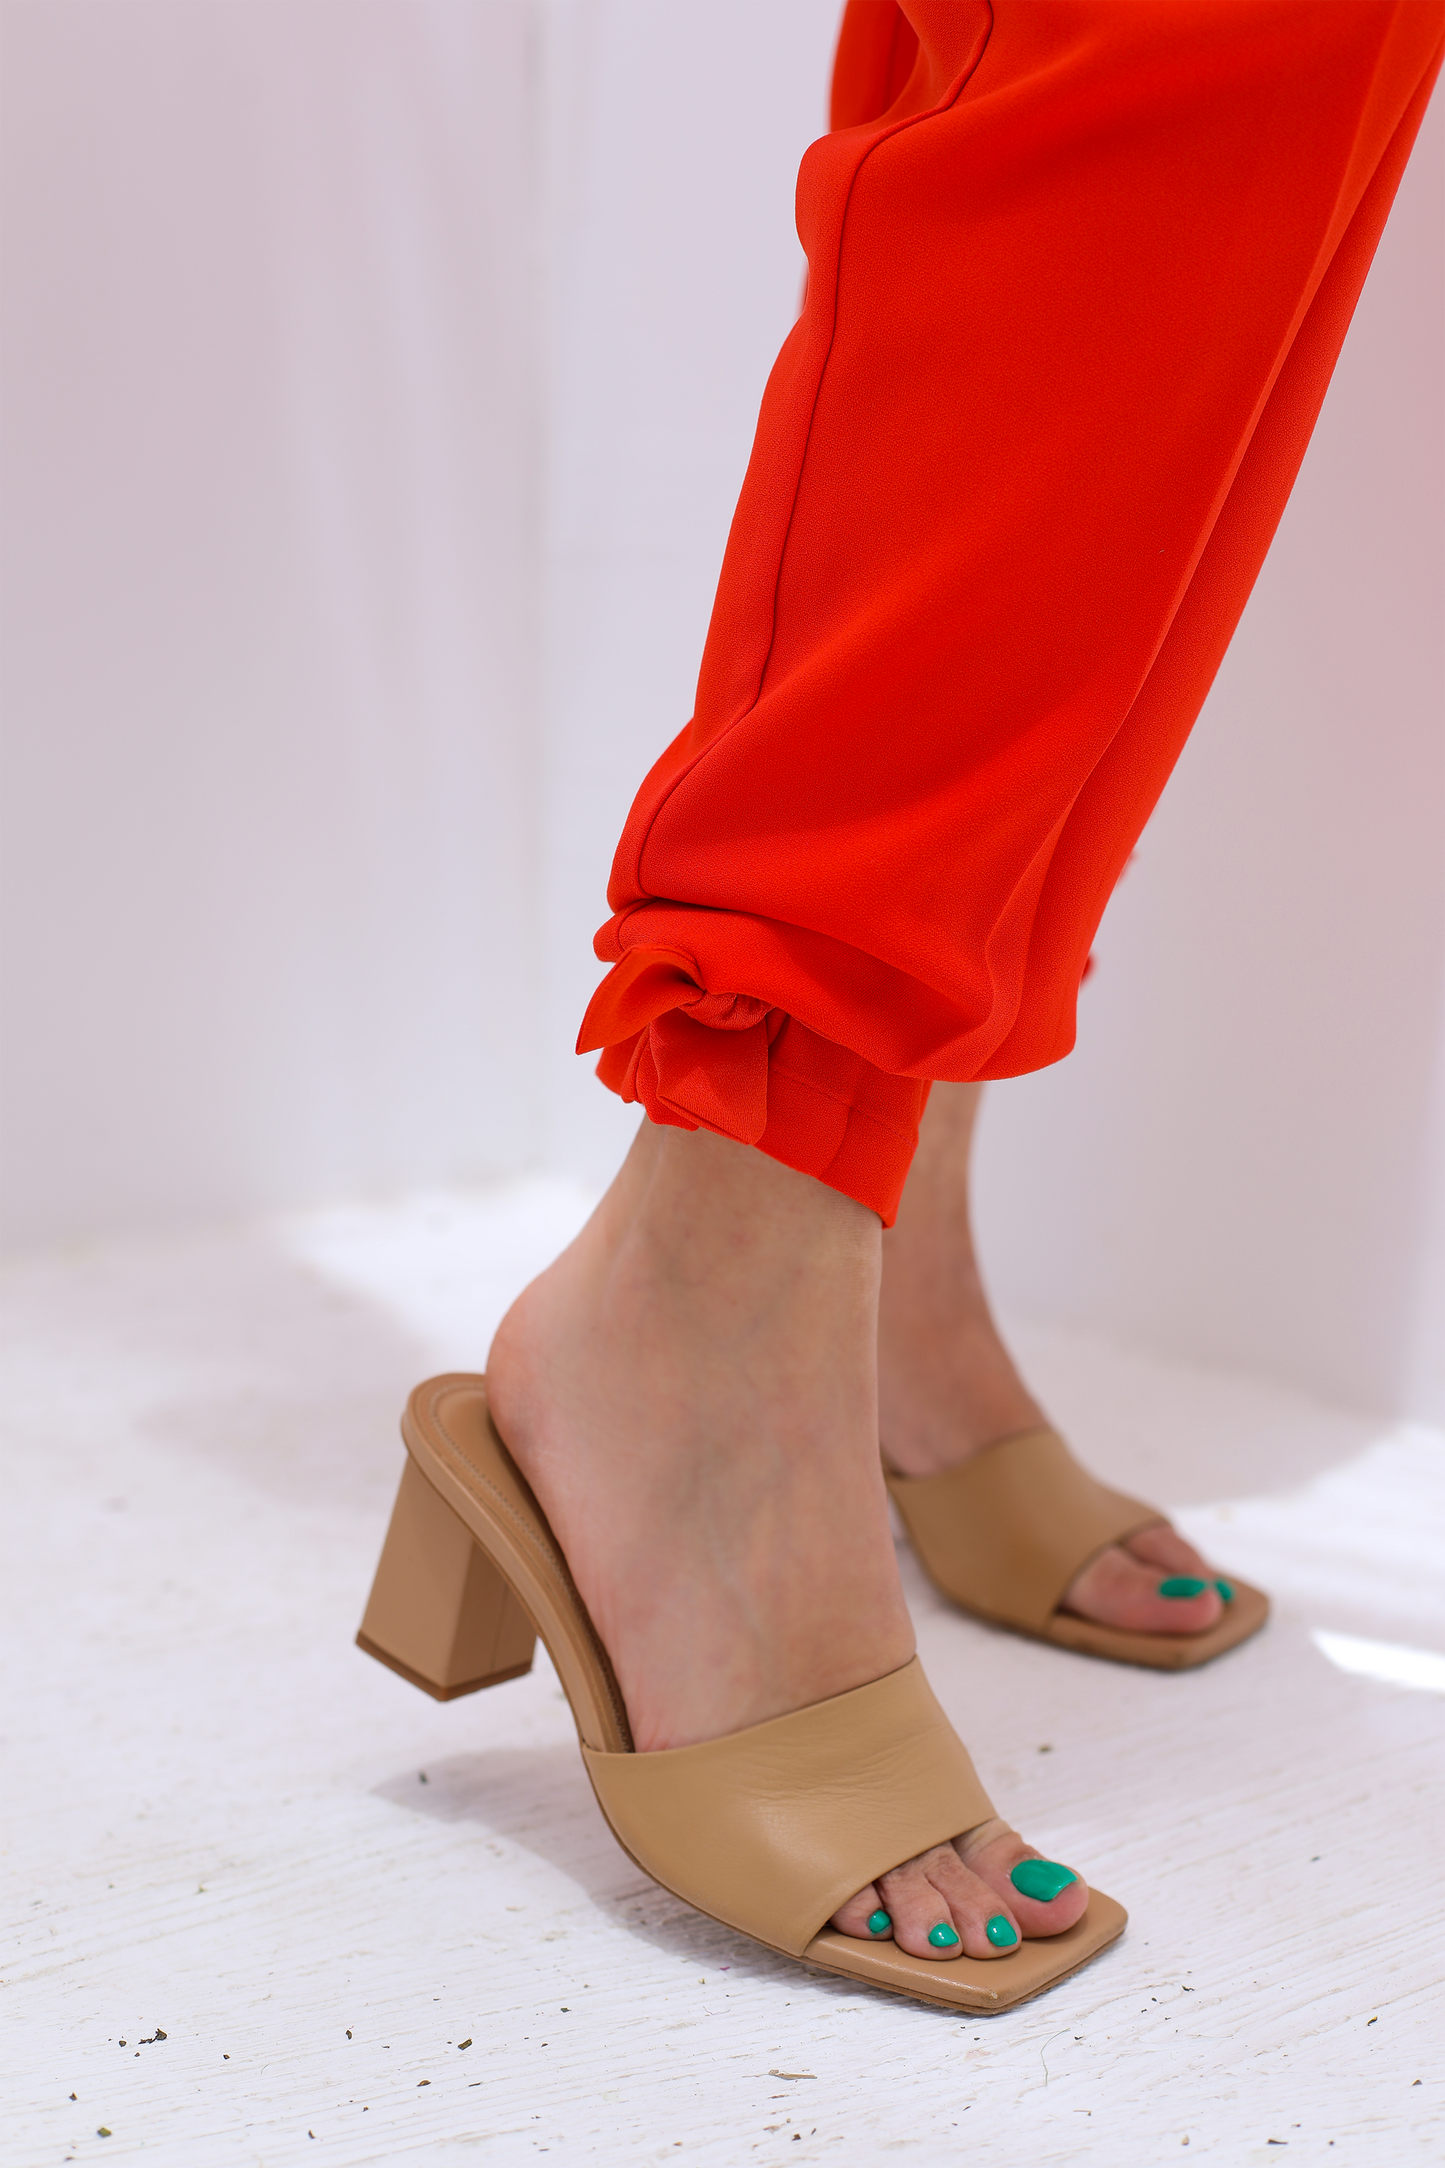 The Flowy Cuffed Trousers